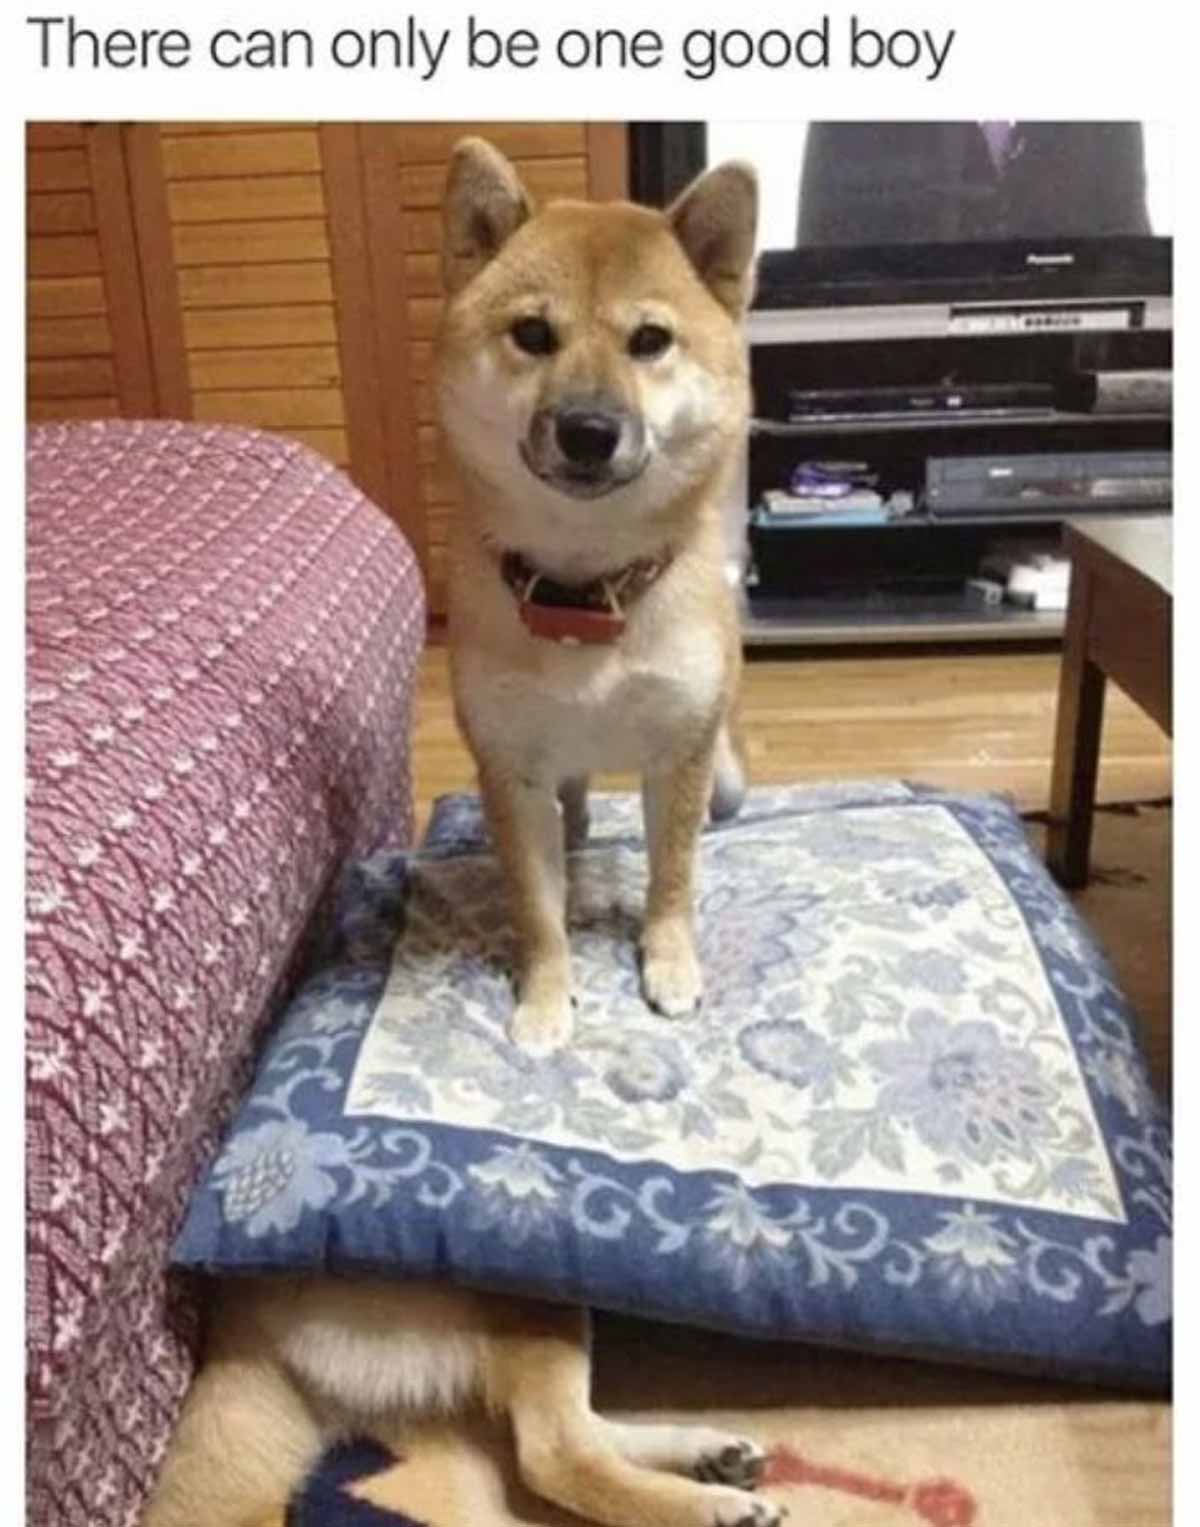 Funny photo of a shiba inu dog standing on a dog bed with another dog under it and the caption says 'there can only be one good boy'